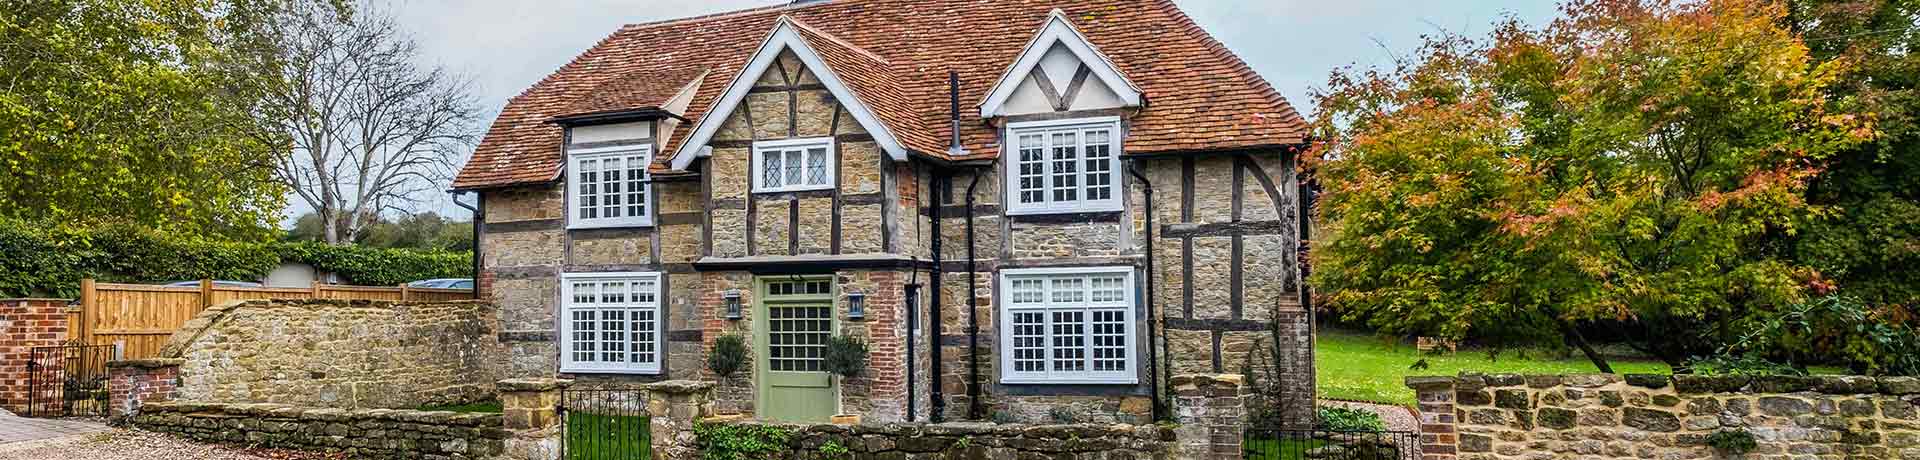 Cottages for 8 people in South England